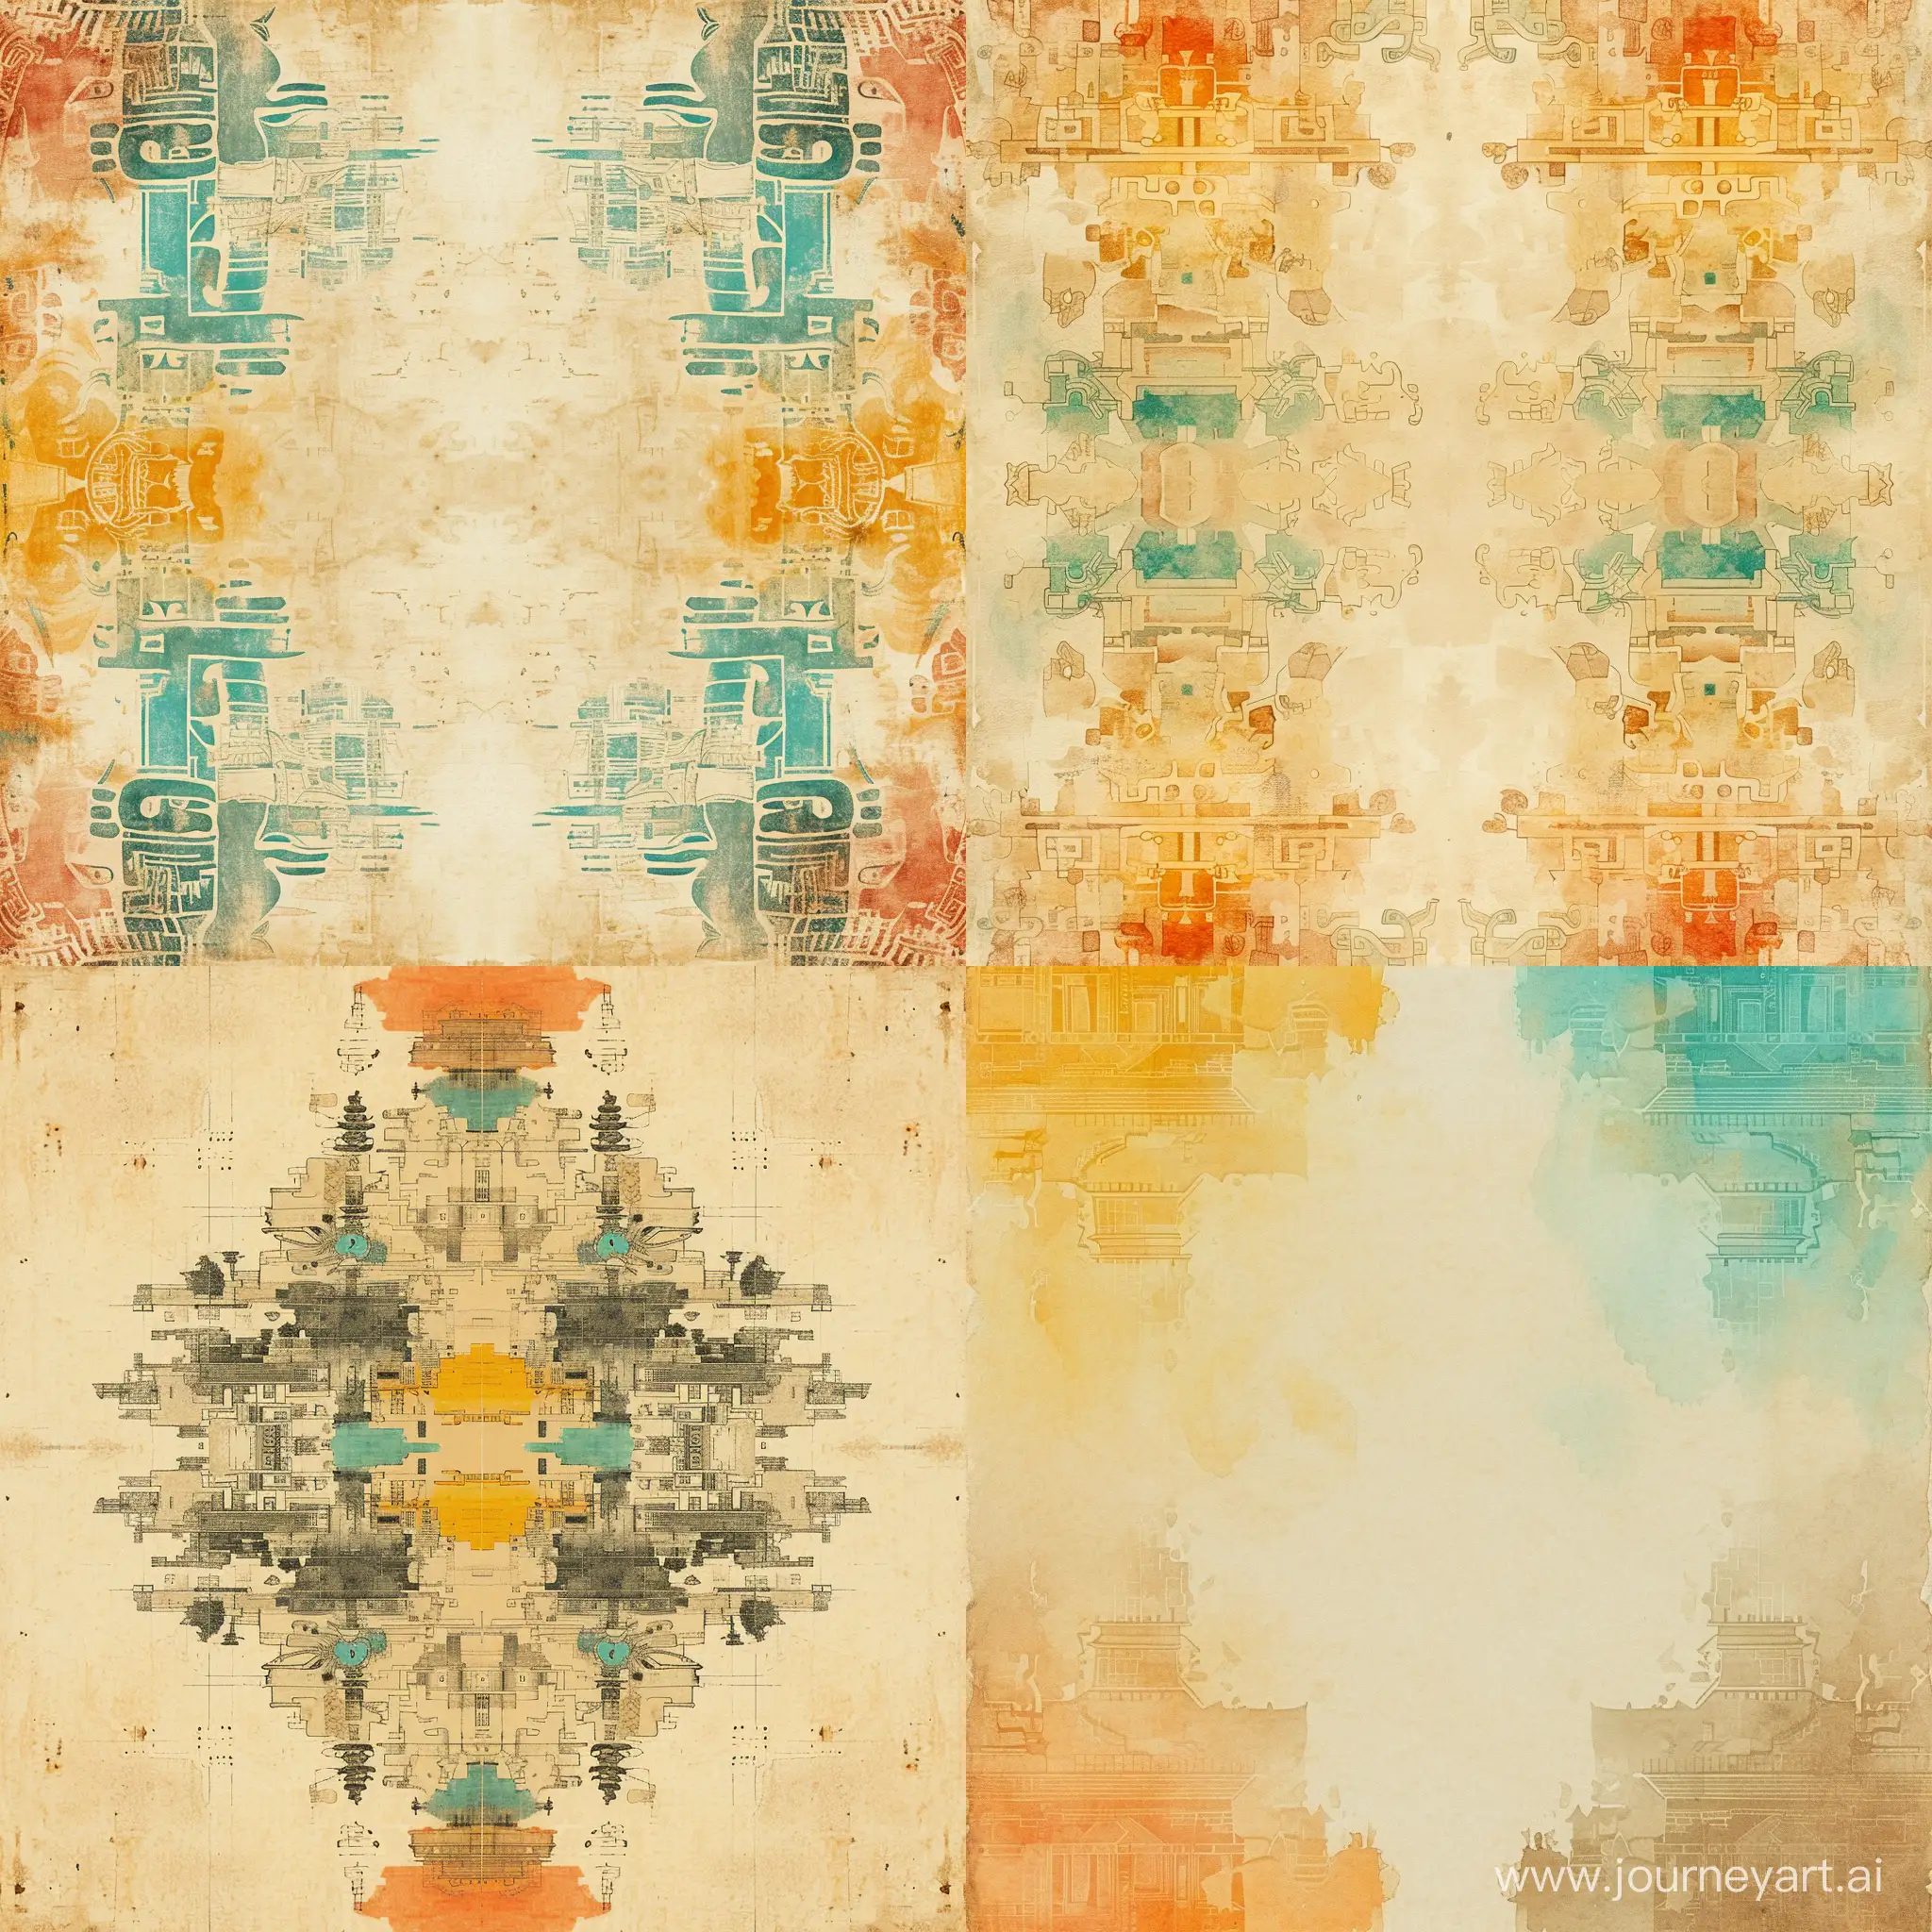 Symmetrical texture of antique paper, barely noticeable elements of ancient Chinese, Aztec, Roman cities, stylized caricature, watercolor, decorative, pure colors, beige, yellow orange, turquoise, brown,flat drawing